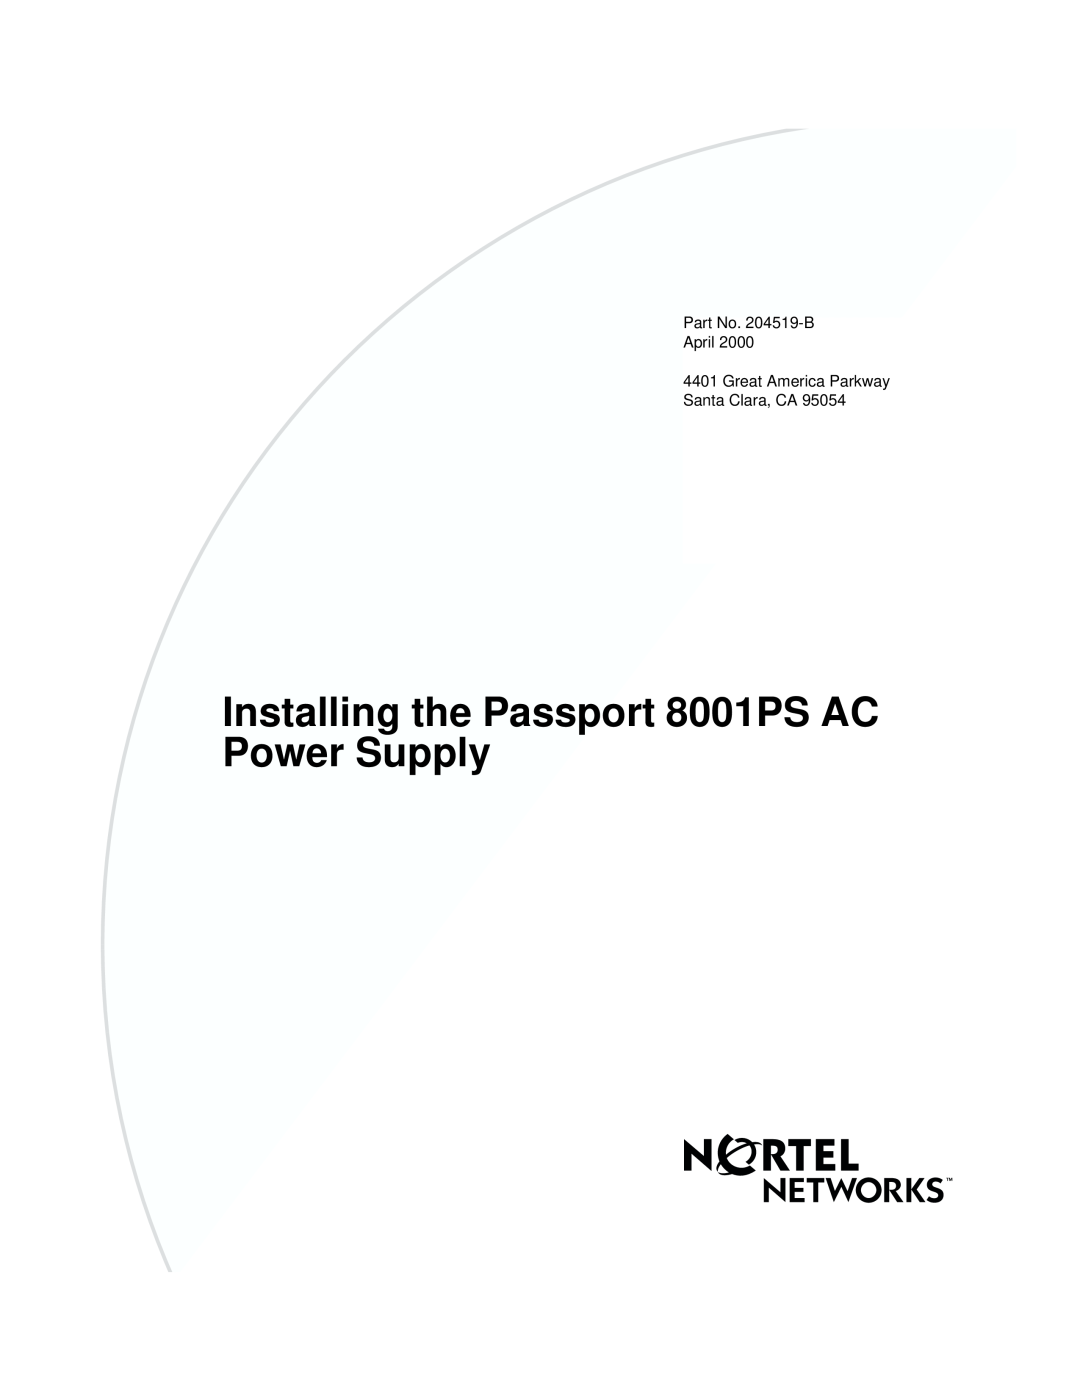 Nortel Networks manual Installing the Passport 8001PS AC Power Supply 